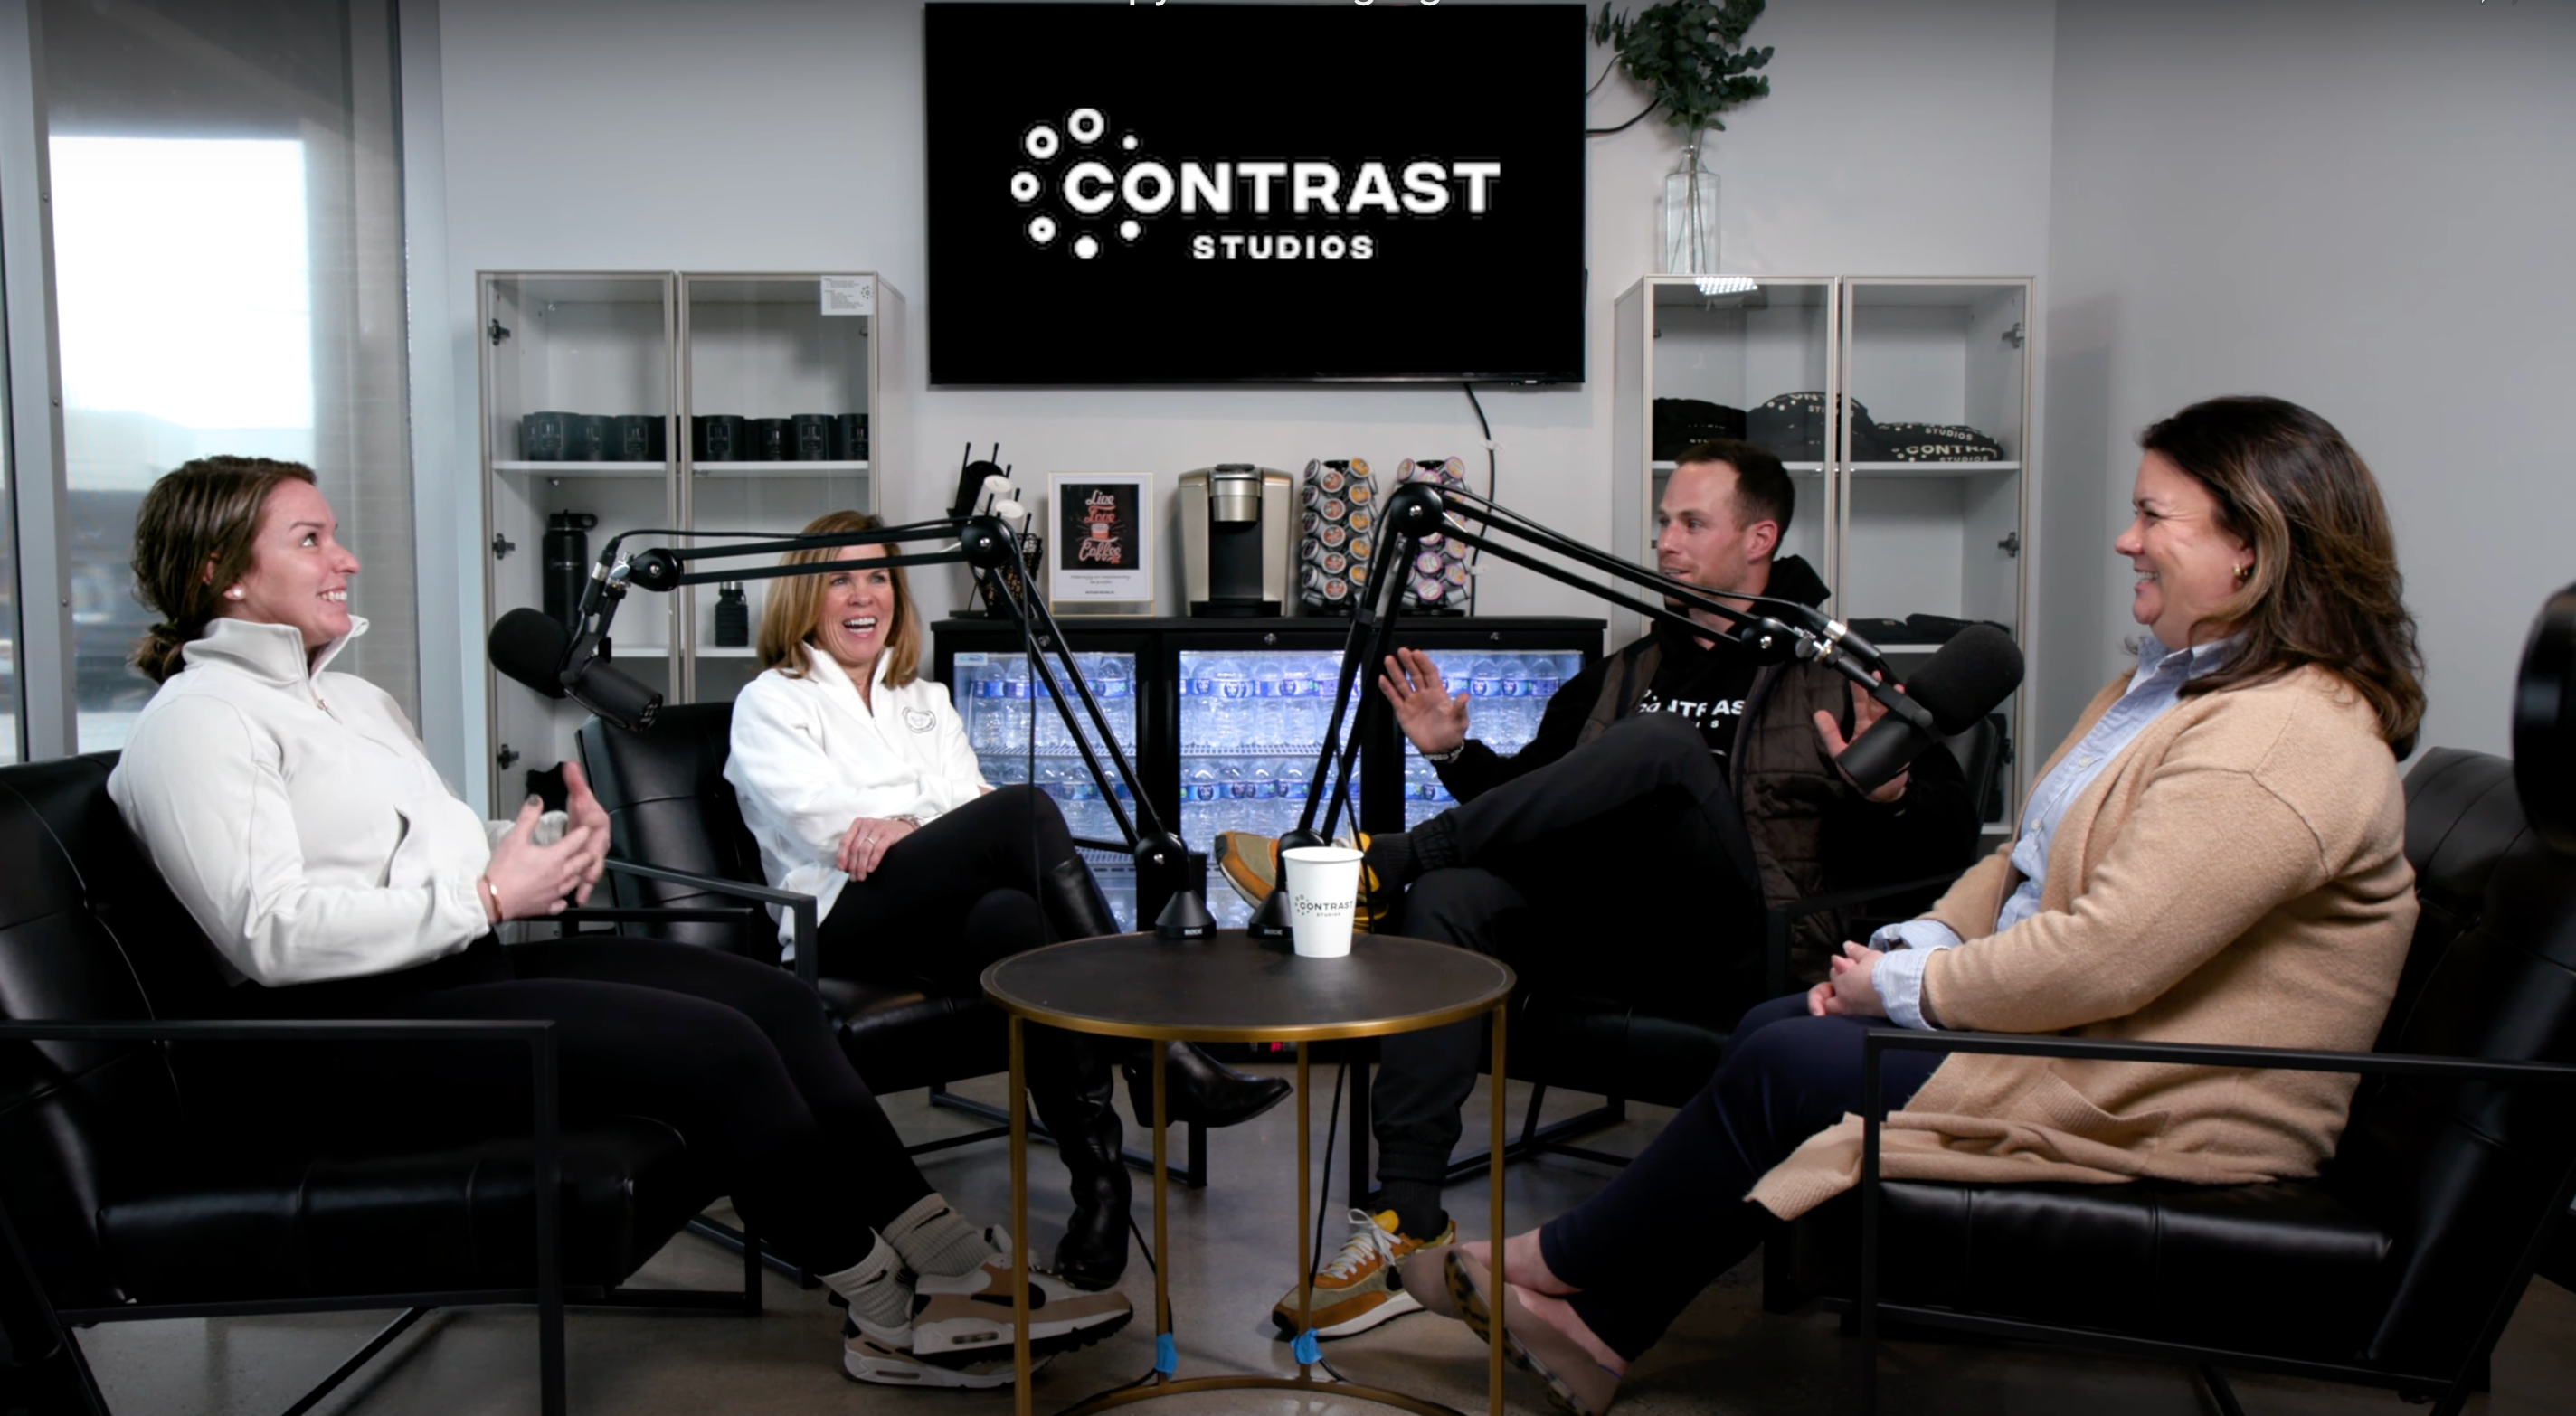 <meta charset="utf-8"><span data-mce-fragment="1">We sat down with three moms who all joined Contrast Studios and they explained why and how this club has truly been a game-changer for them.</span>